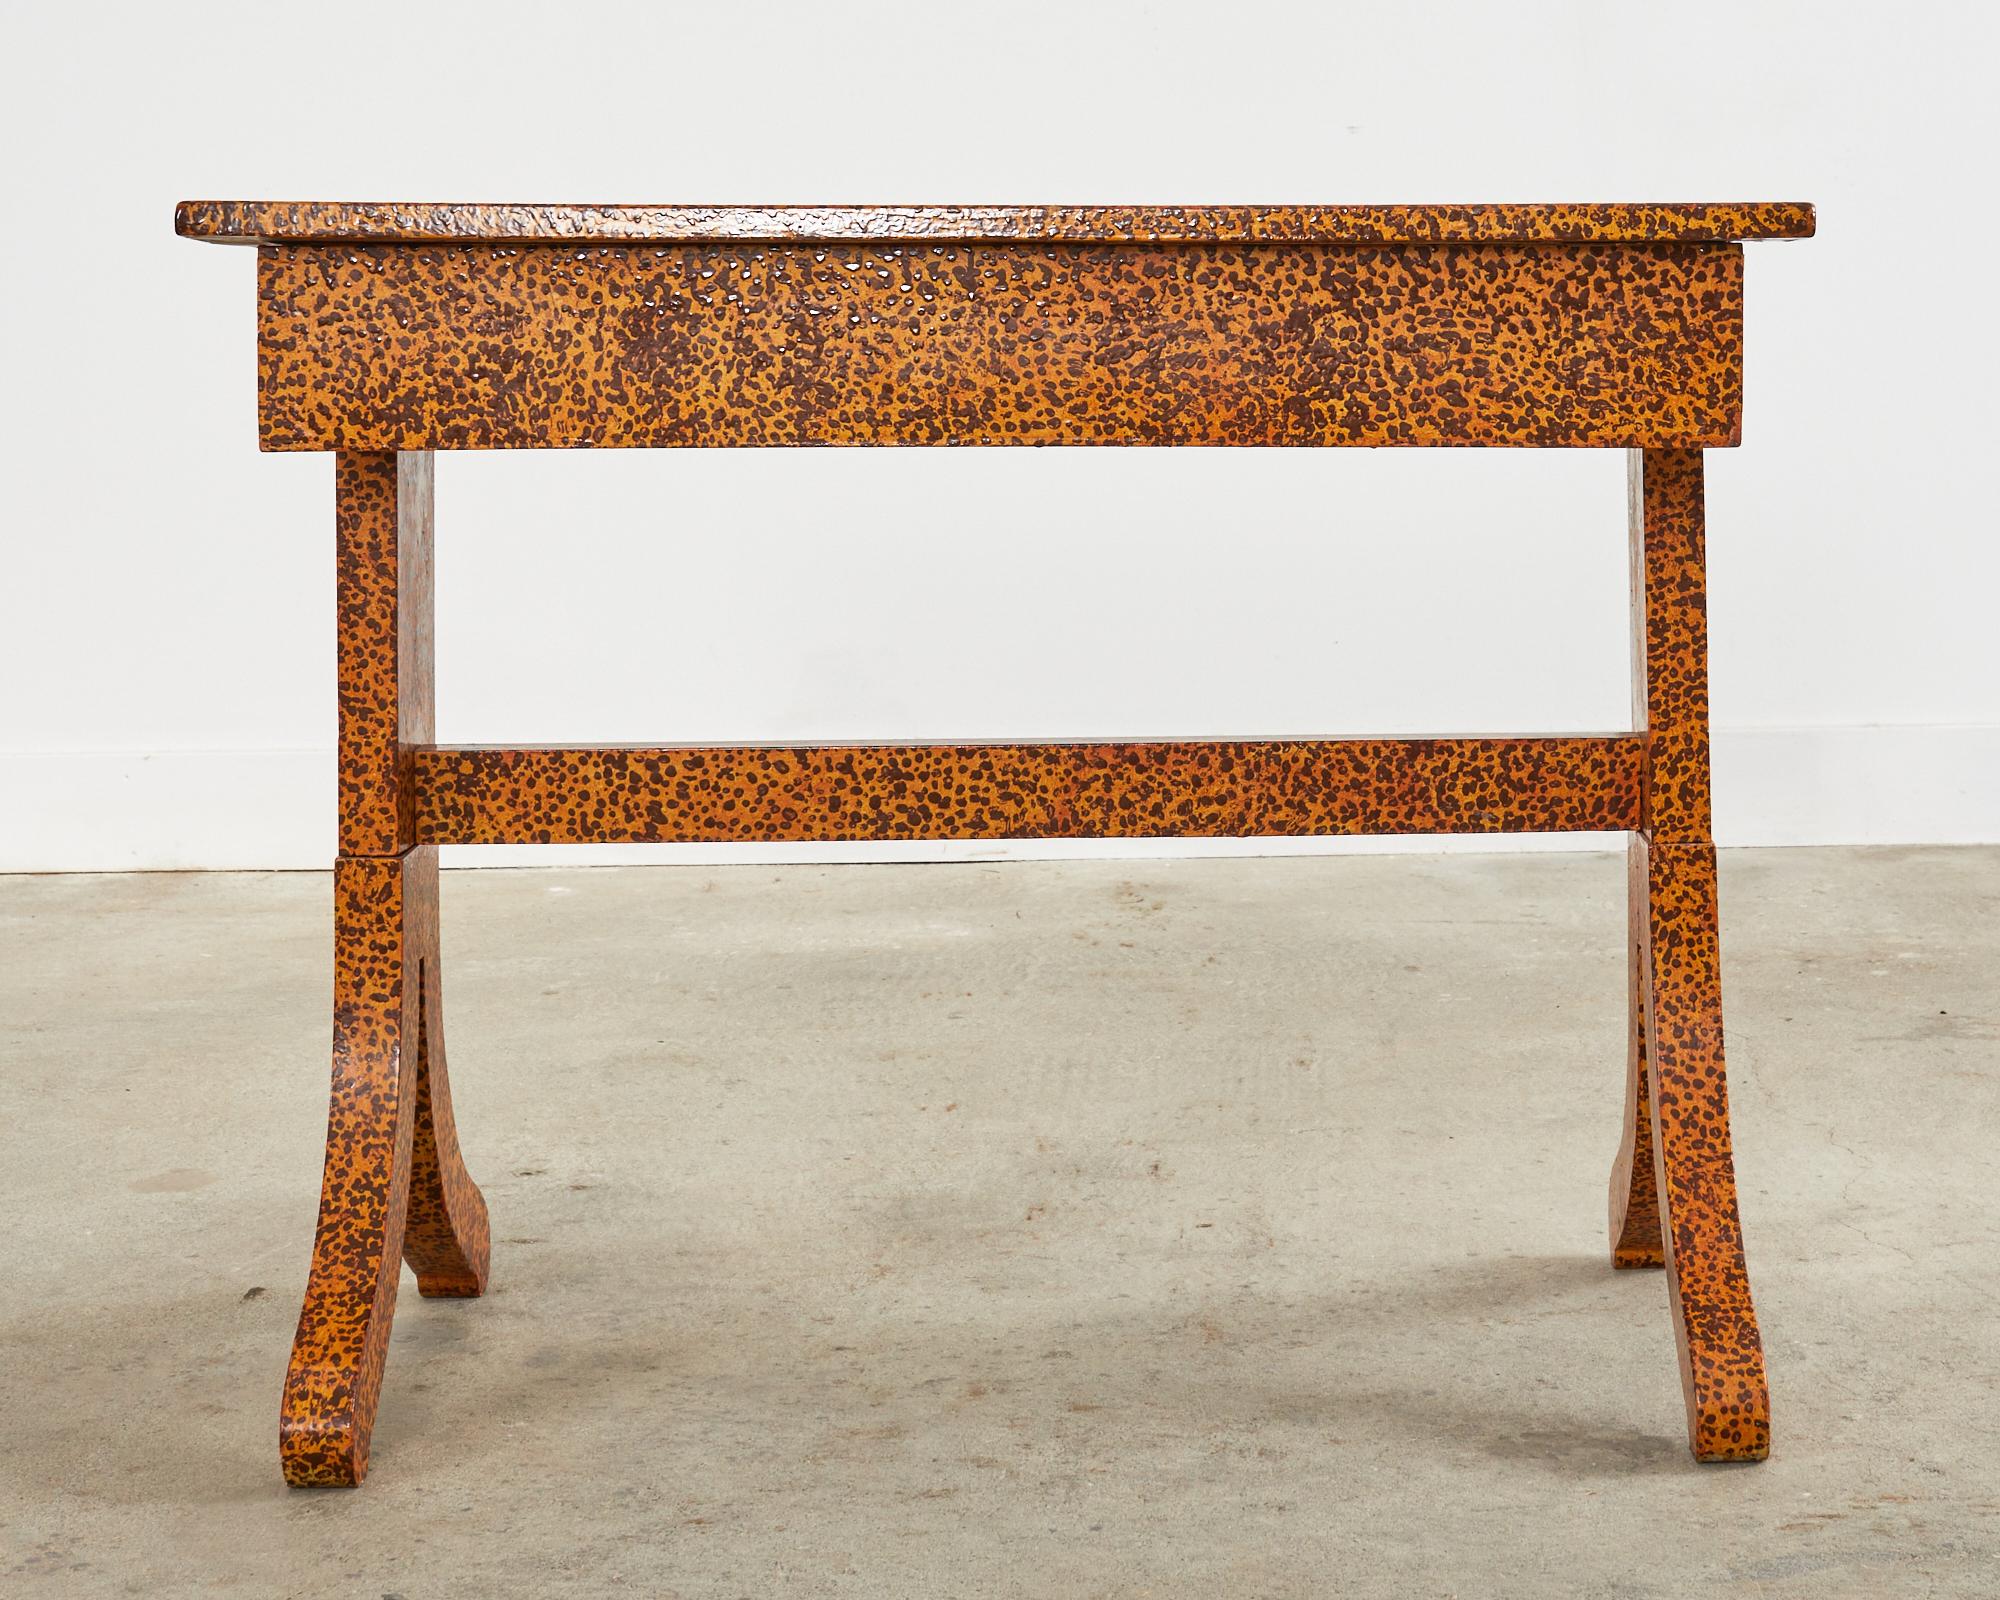 Lacquered English Regency Style Table Lacquer Speckled by Artist Ira Yeager For Sale